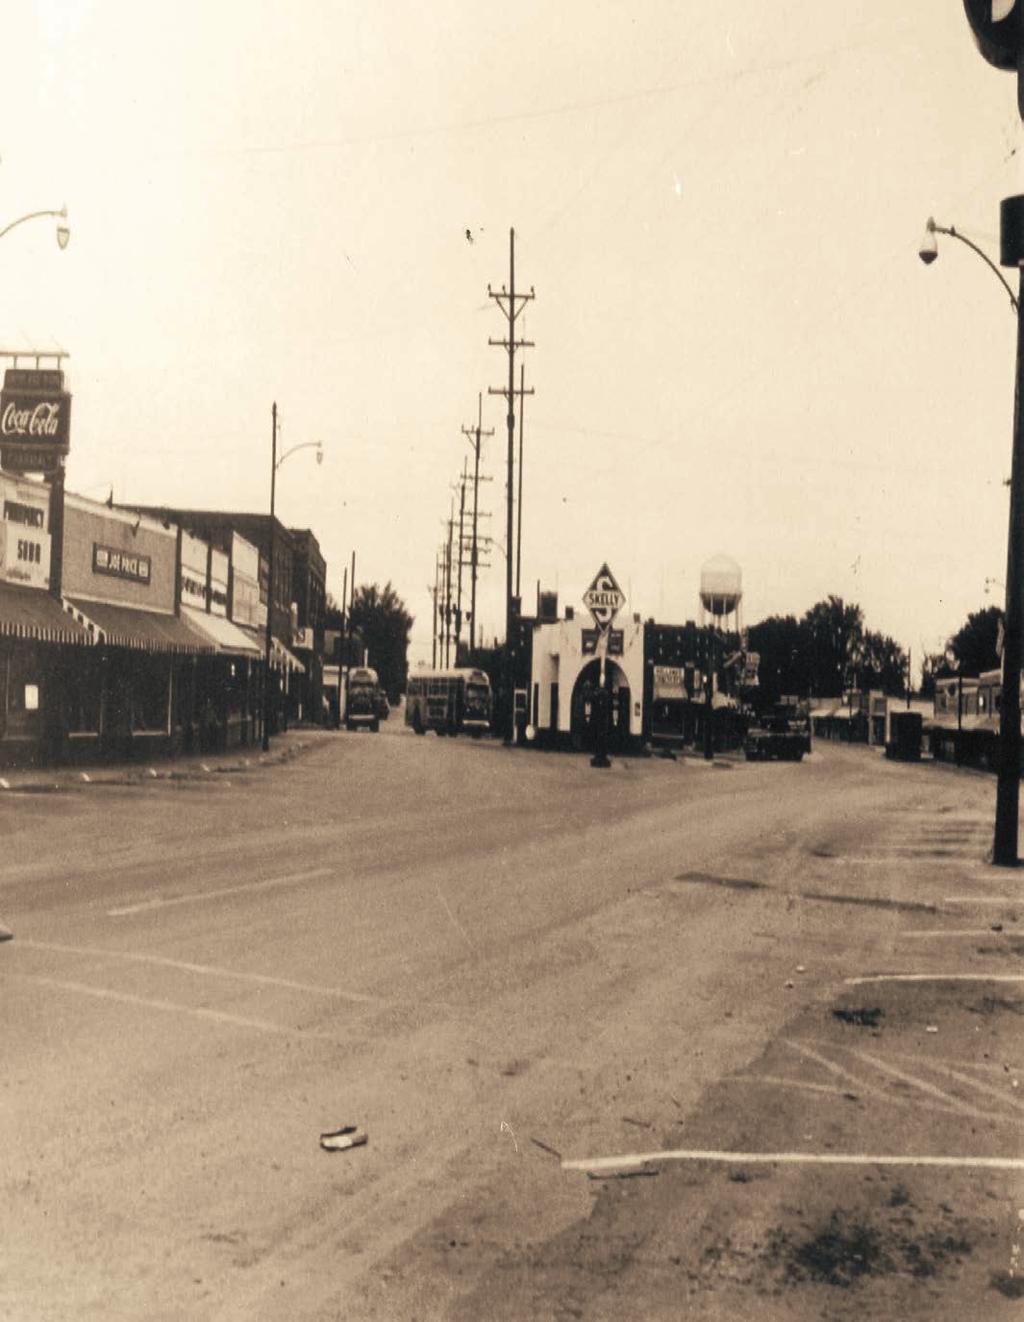 Can you identify where this picture was taken? Clue: This city traces its roots back to 1905 with the arrival of its founder, William B. Strang Jr.